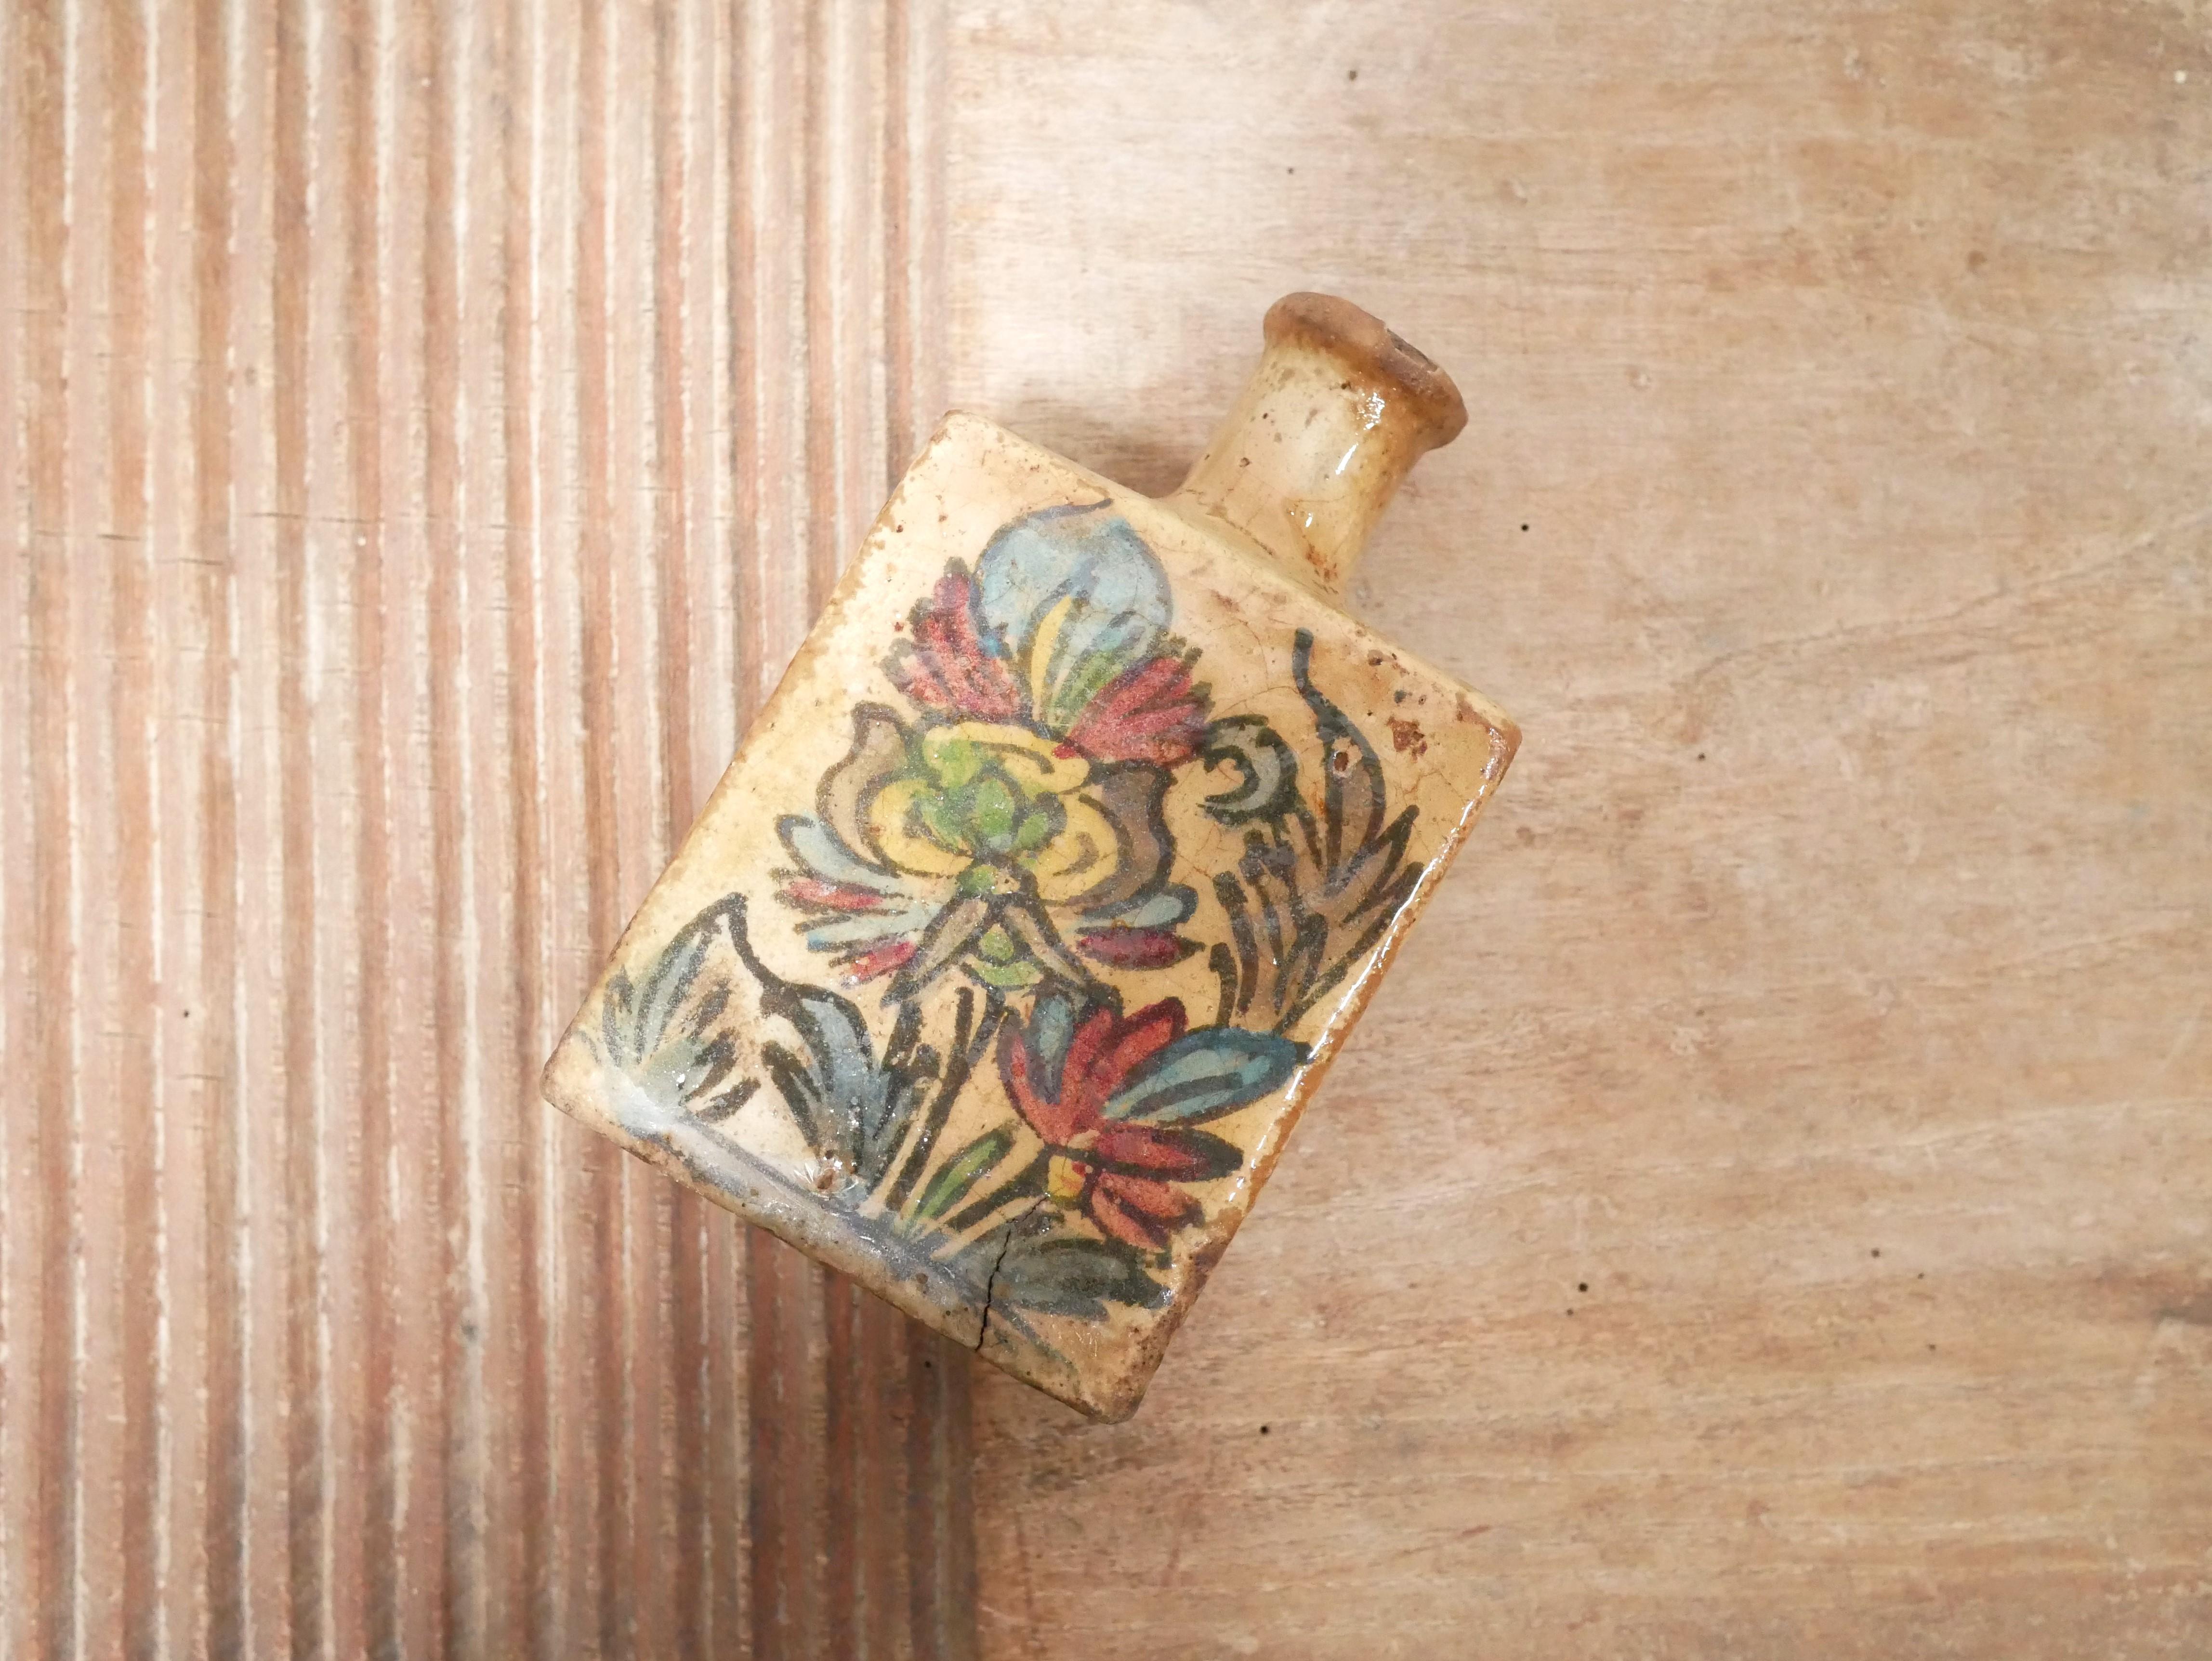 Handmade glazed terracotta bottle, Iran, late 19th century, Qajar dynasty period.

Nice warm color, harmonious and modern shape.
This bottle, steeped in history, does not lack character and elegance. It will be perfect in a current